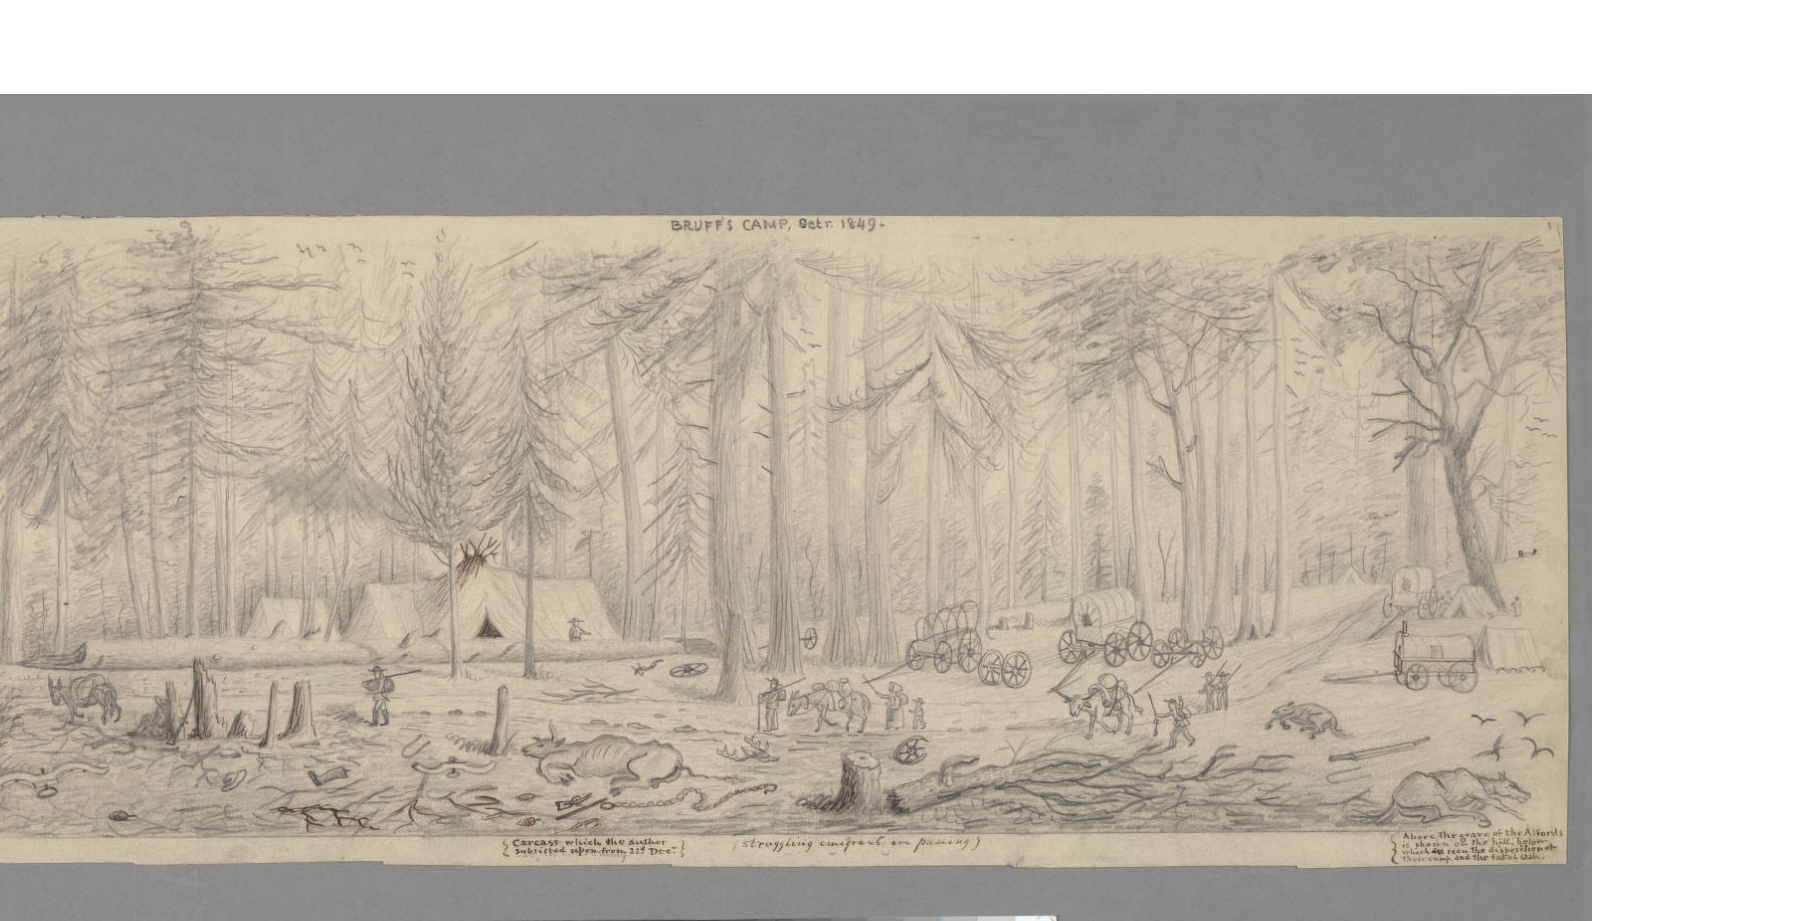 In the foreground are cut trees, dropped branches, and stumps, two dead horses and a dead cow, a discarded boot, two ox yokes, wagon chain and broken wagon tongue, a deer skull with antlers, and a broken wagon wheel